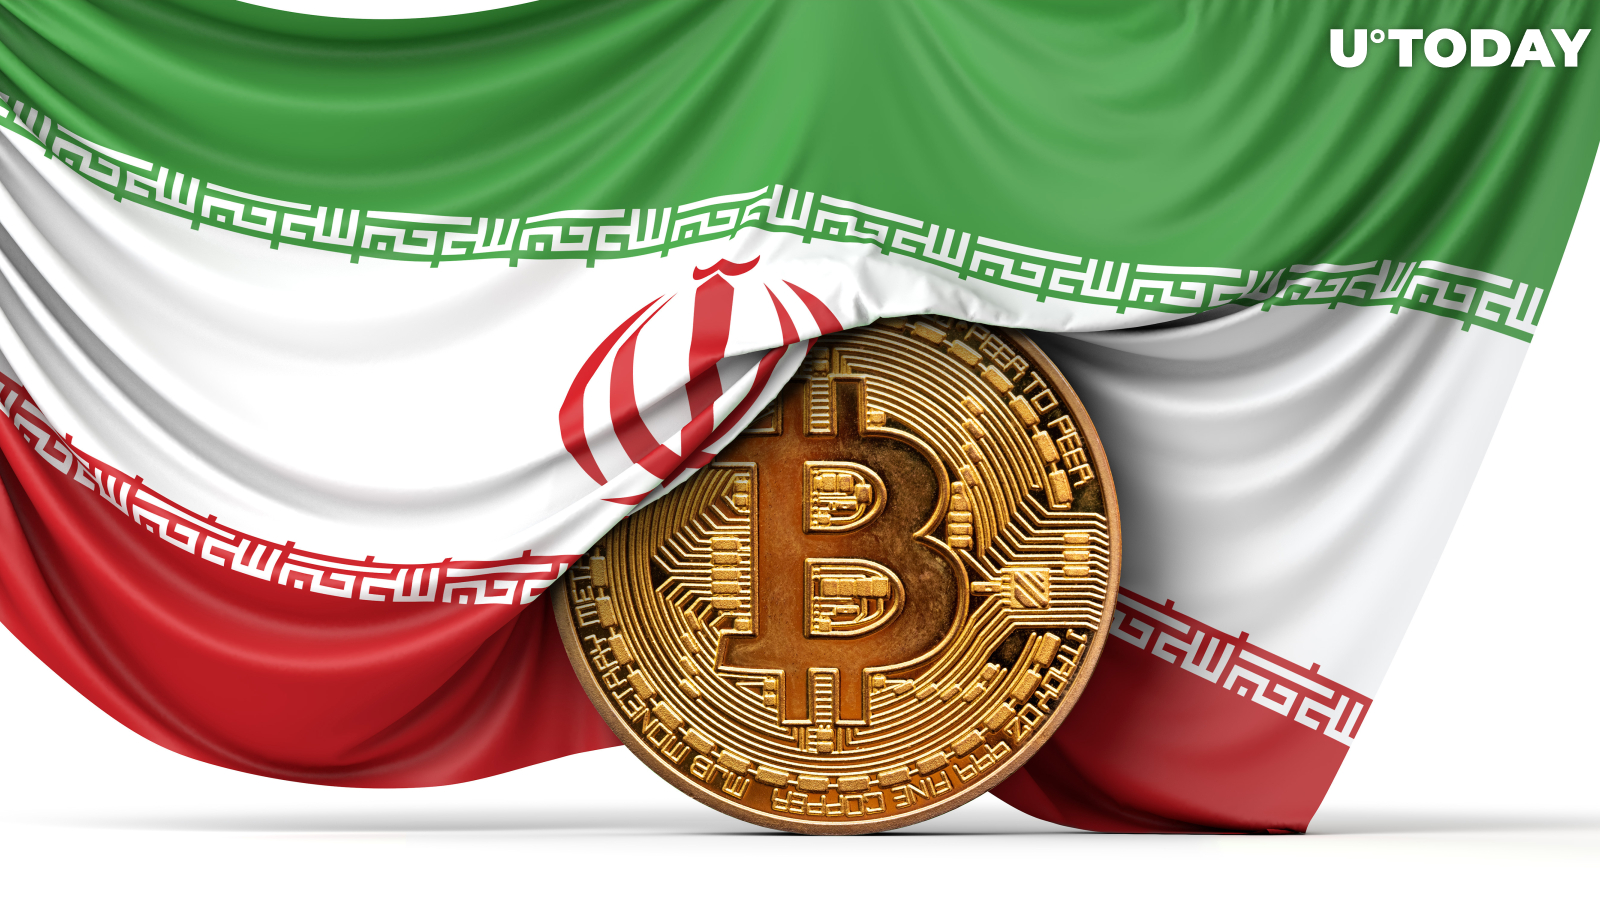 Bitcoin Miners to Face Tougher Penalties in Iran if They Operate Illegally